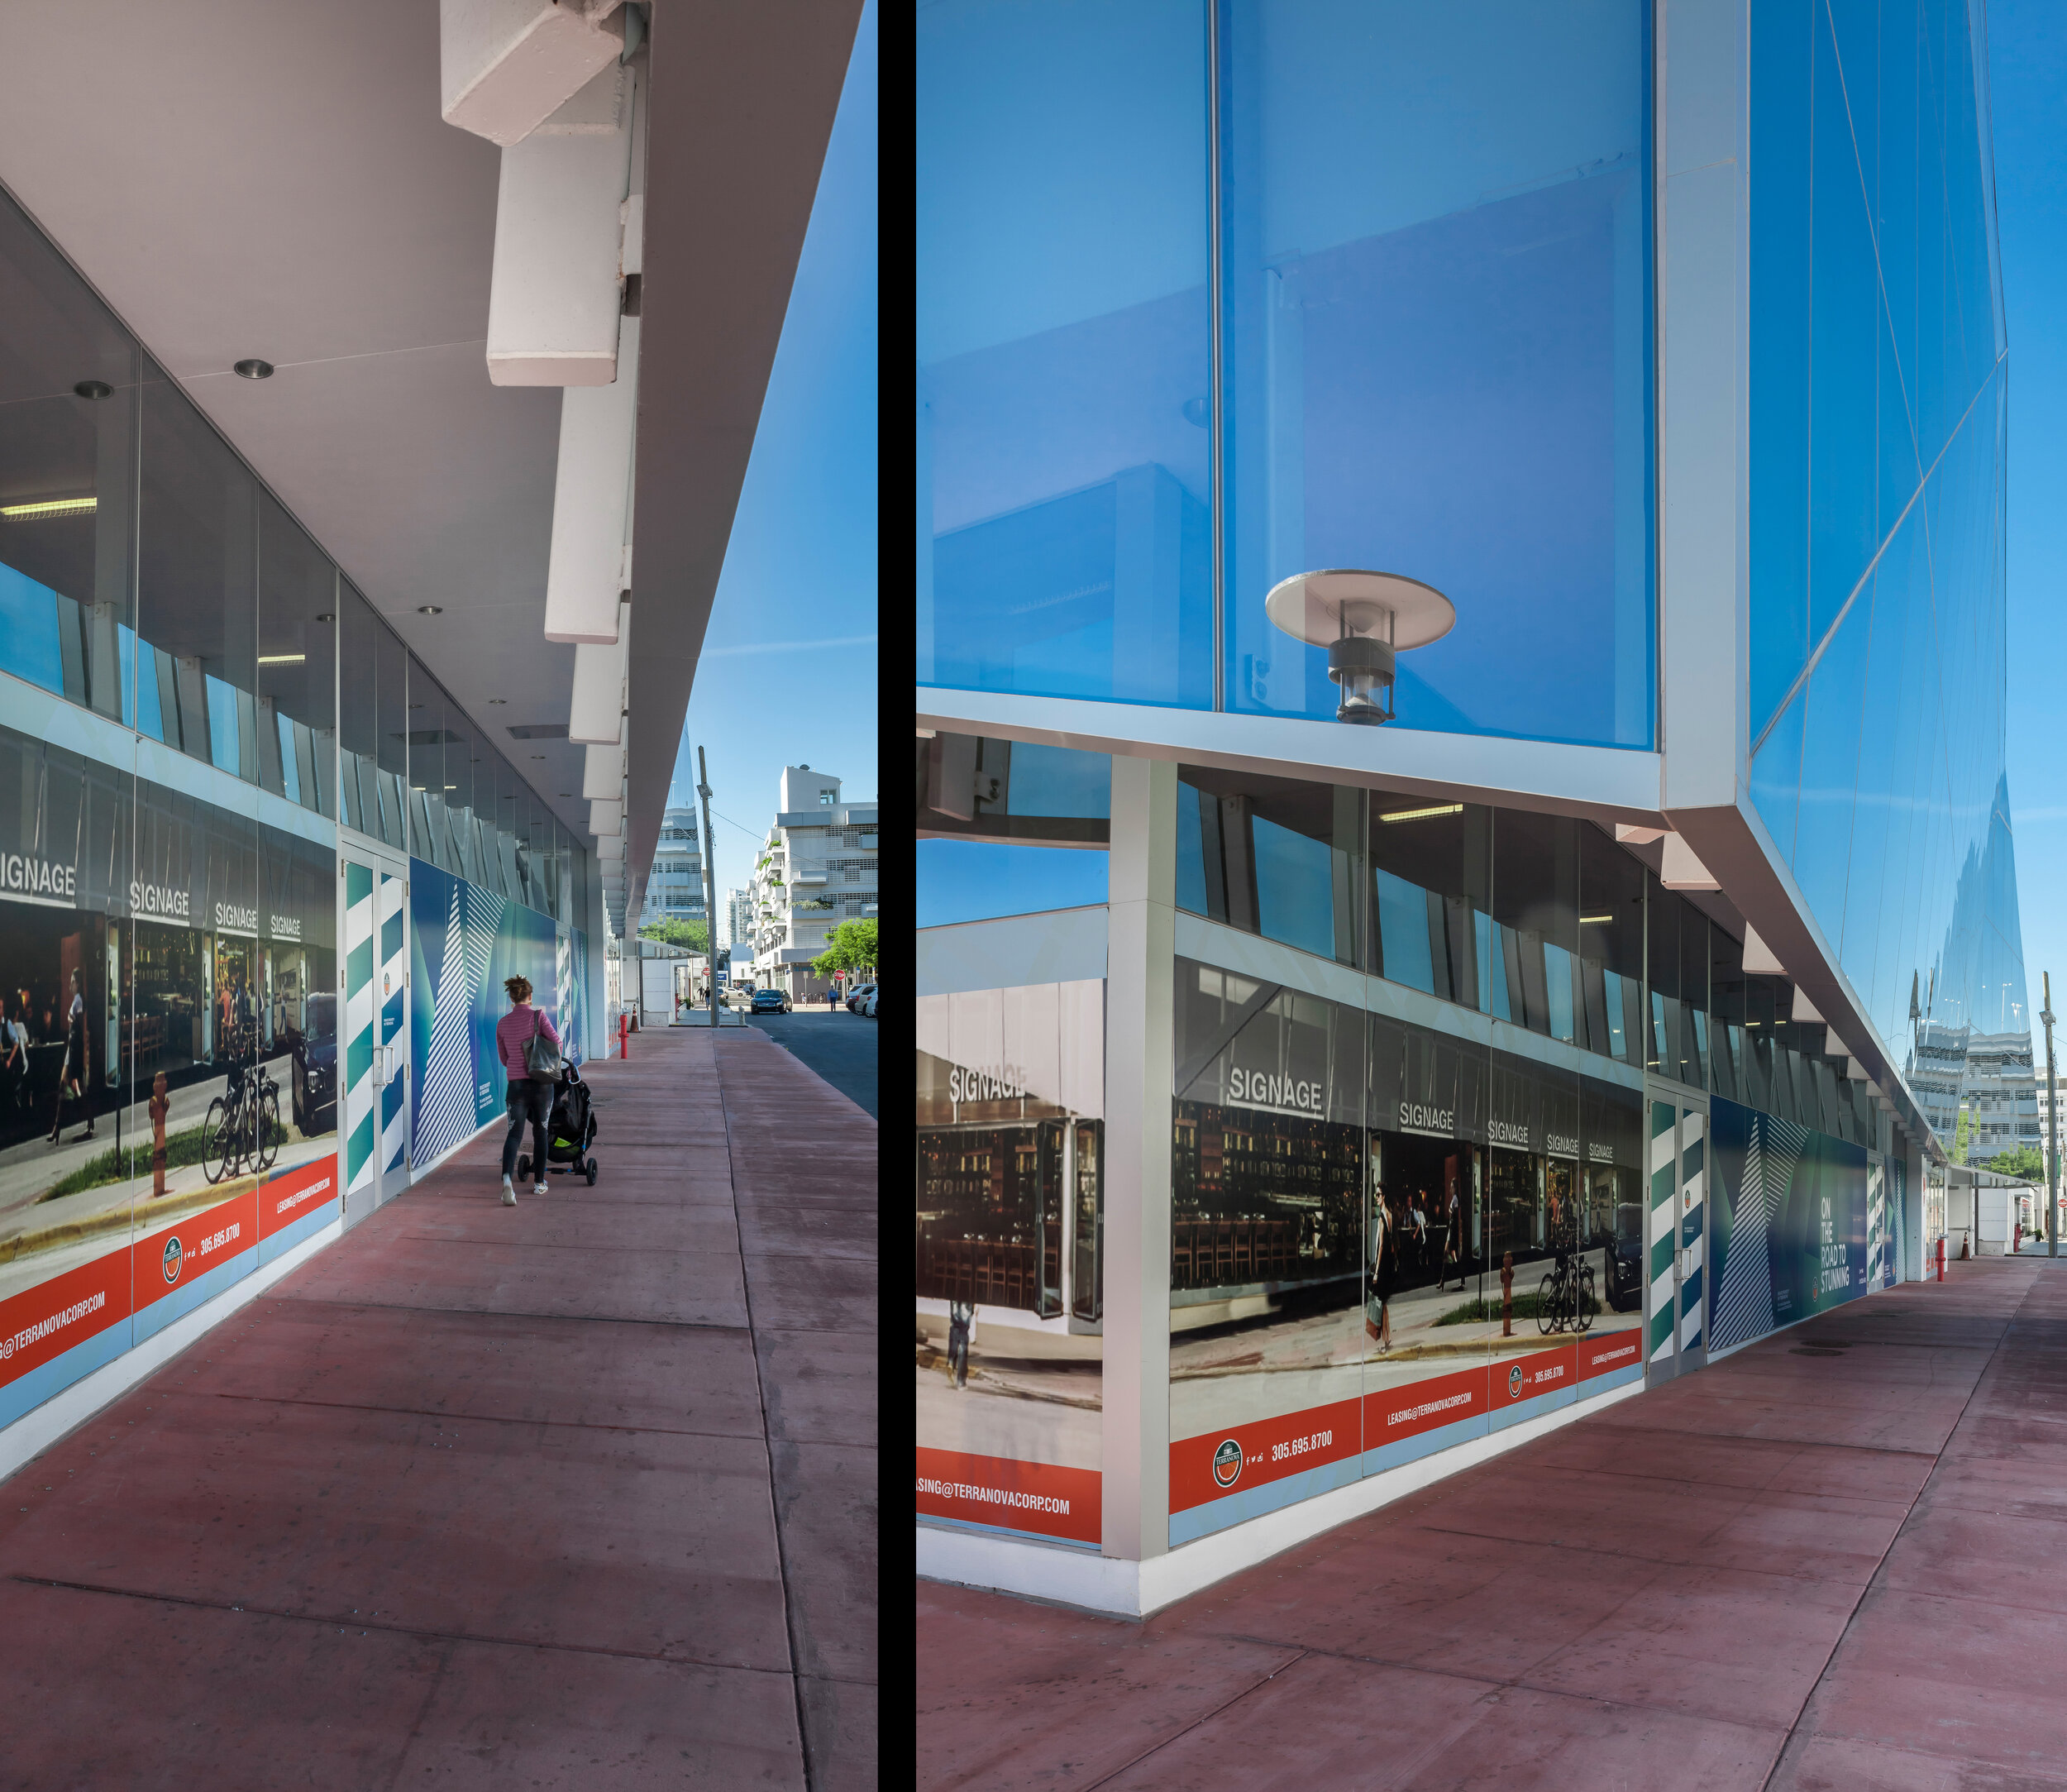  A national retail brand occupies the majority of the building. Finer-grained retail shops at street level will engage the pedestrian experience. Recessed storefronts create an overhang that protects from rain and sun.  